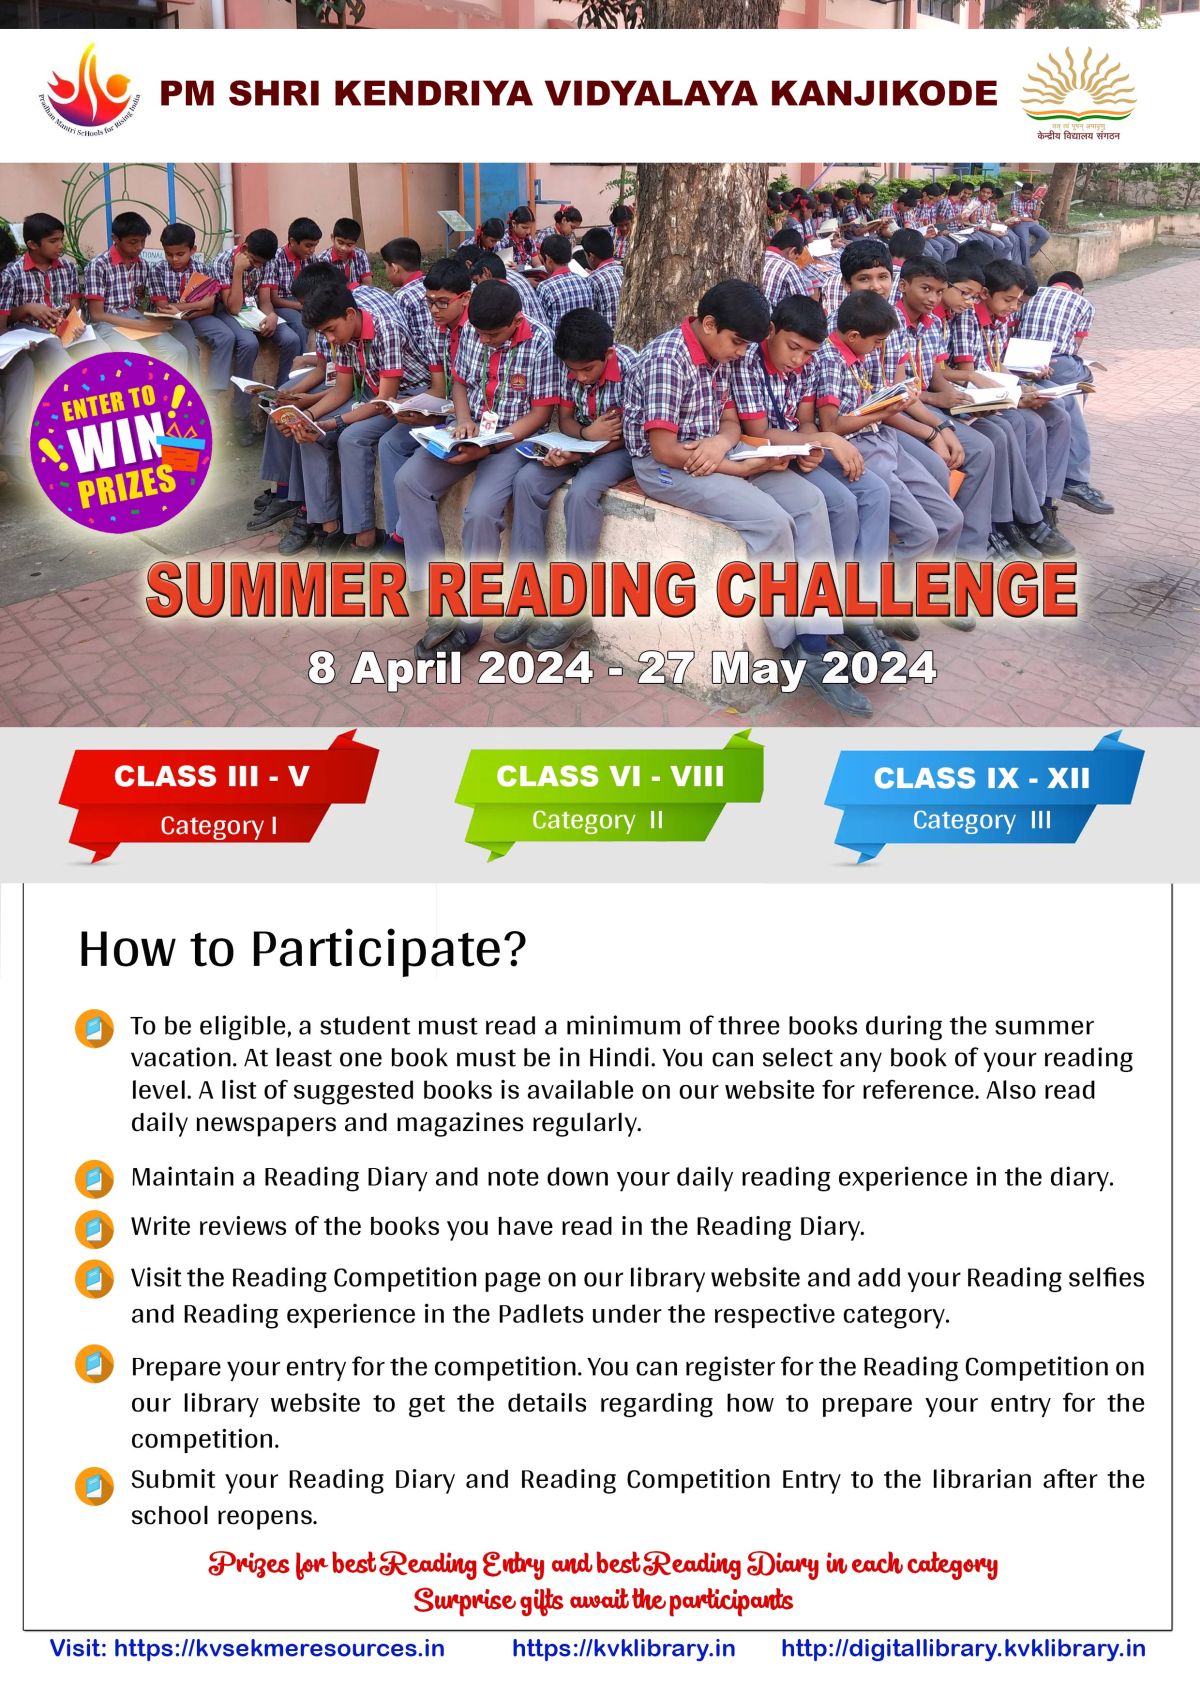 Summer Reading Challenge 2024 Class IX to XII - Share your reading selfies